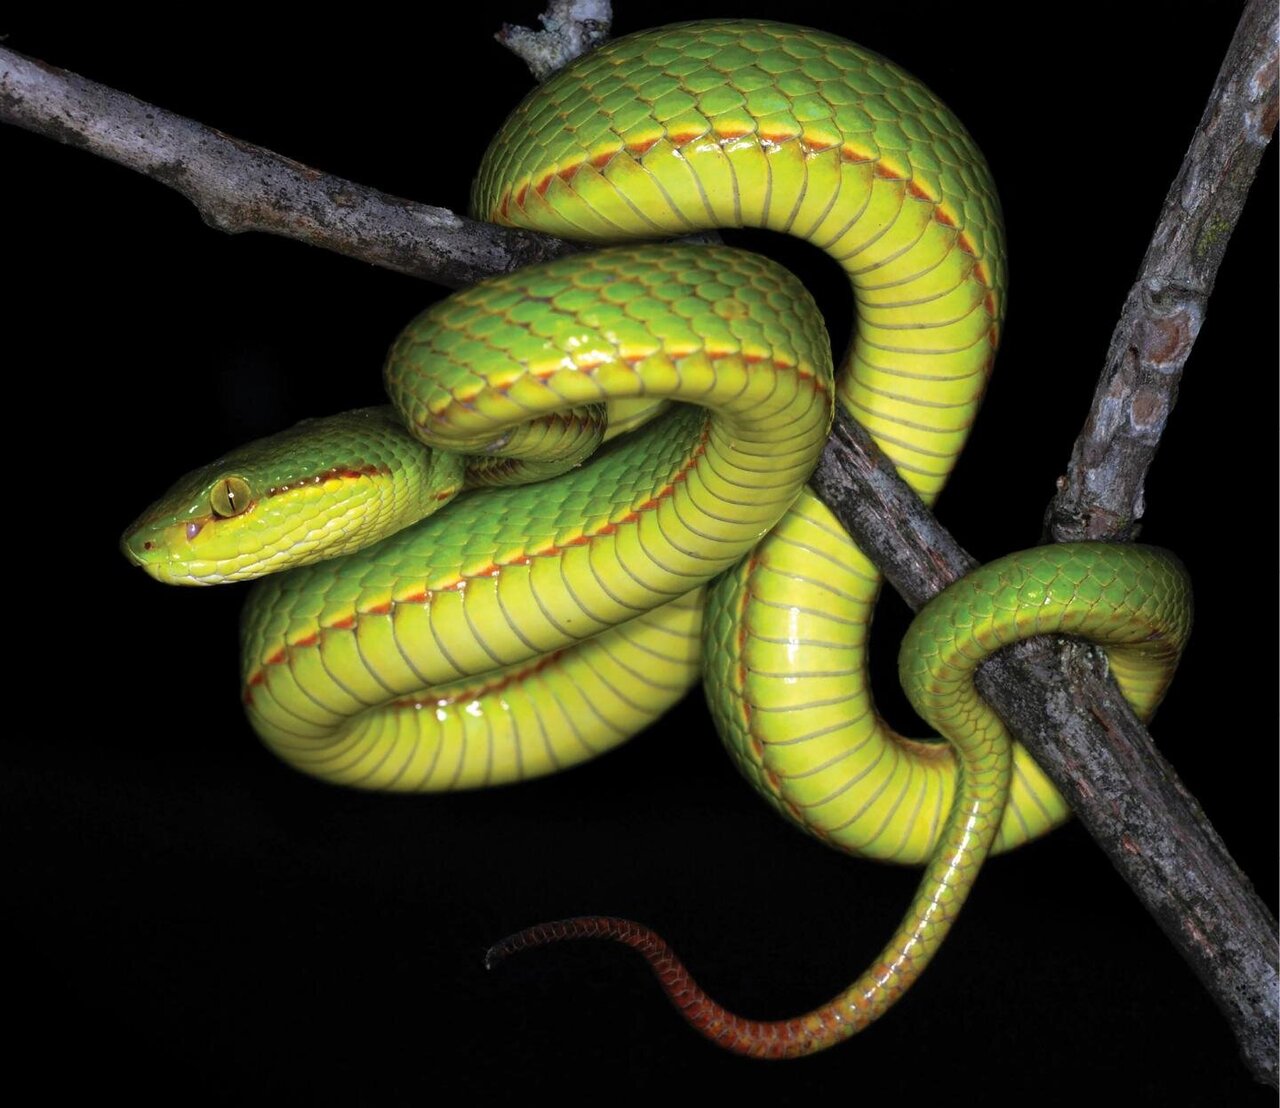 Welcome to the House of Slytherin: Salazar's pit viper, a new green pi...